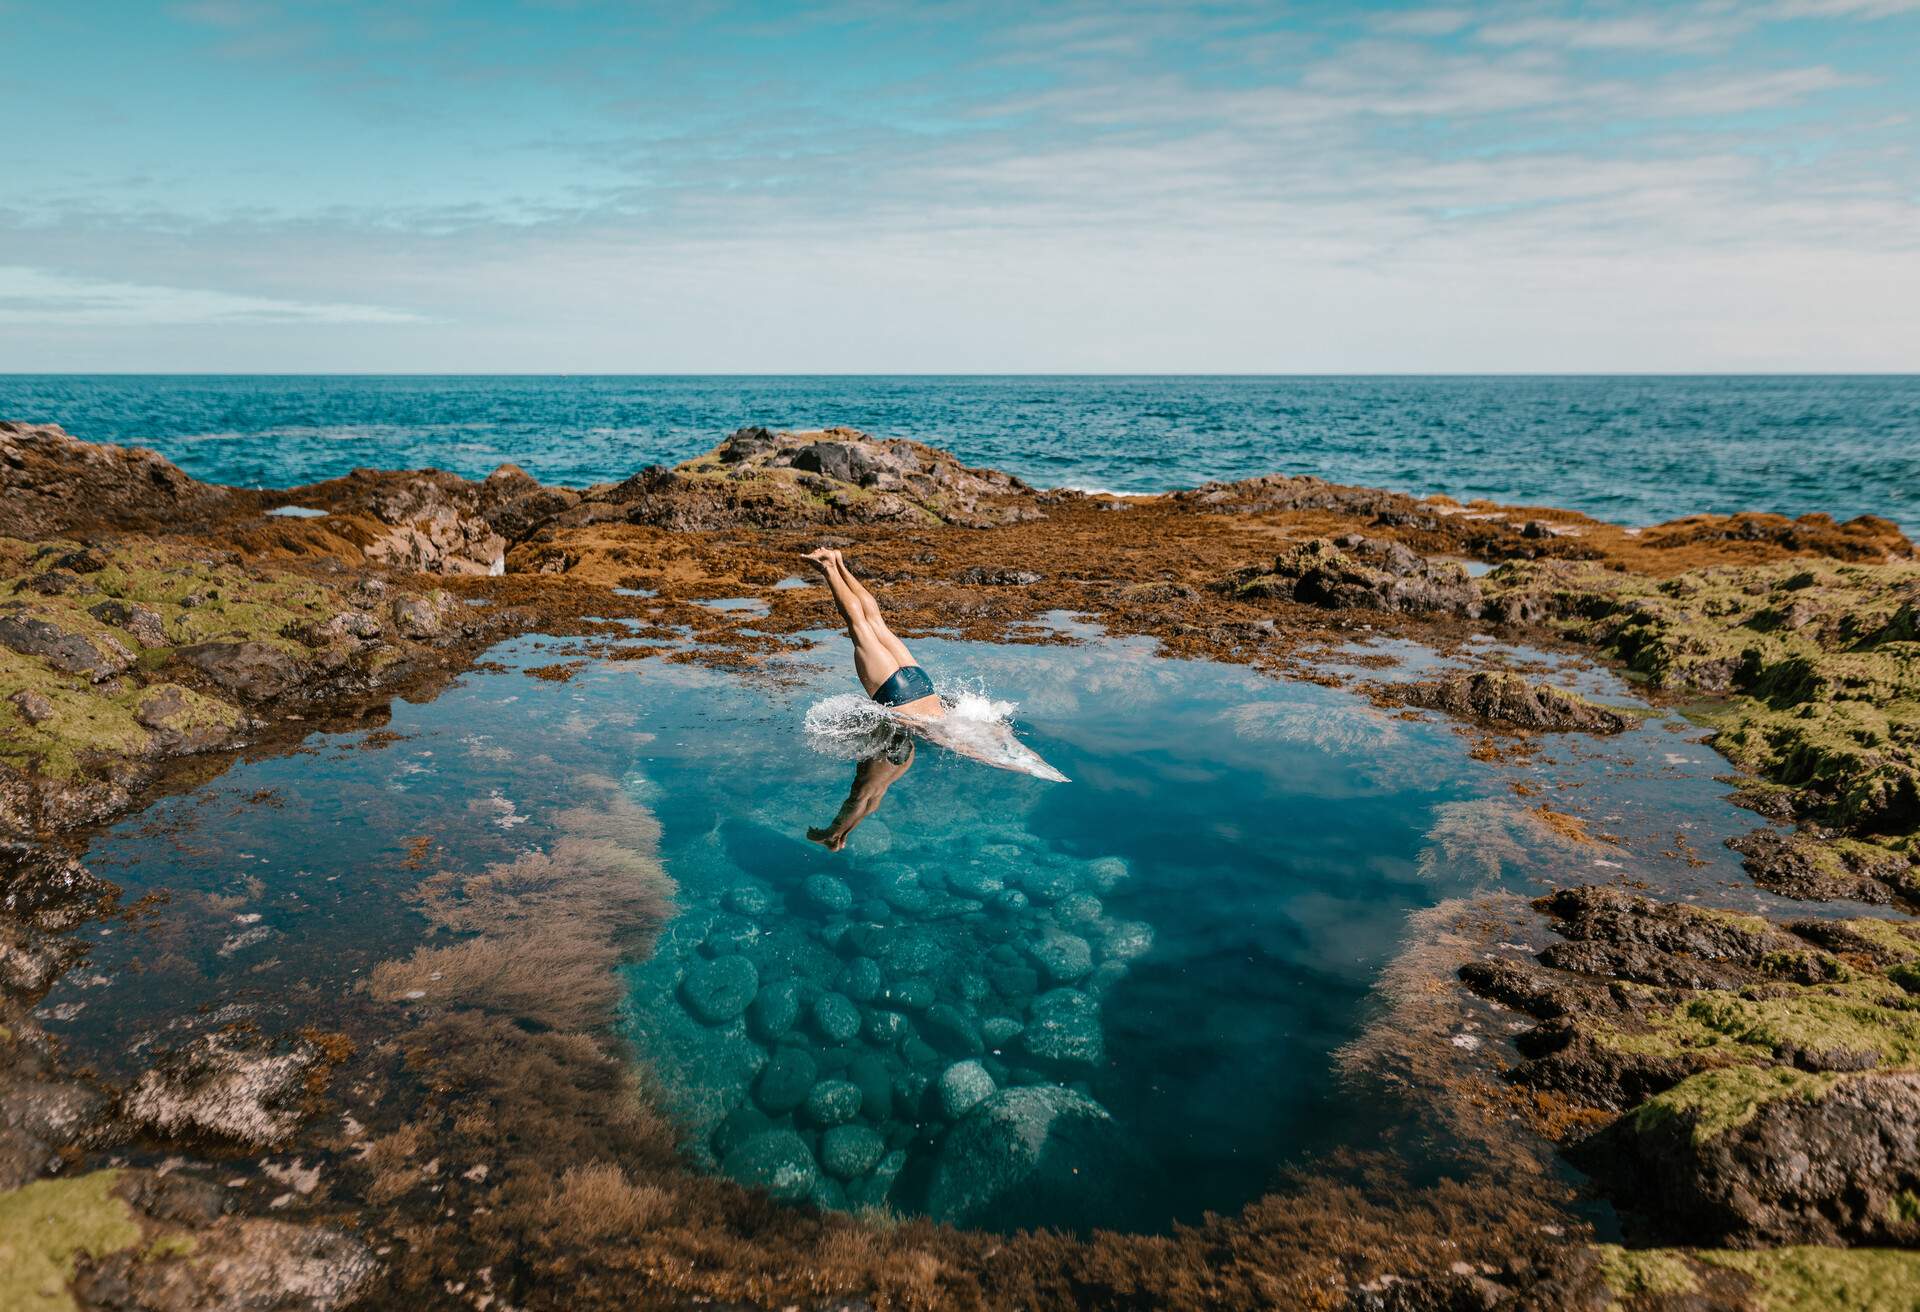 A male tourist dive into the natural turquoise pool alongside the ocean.